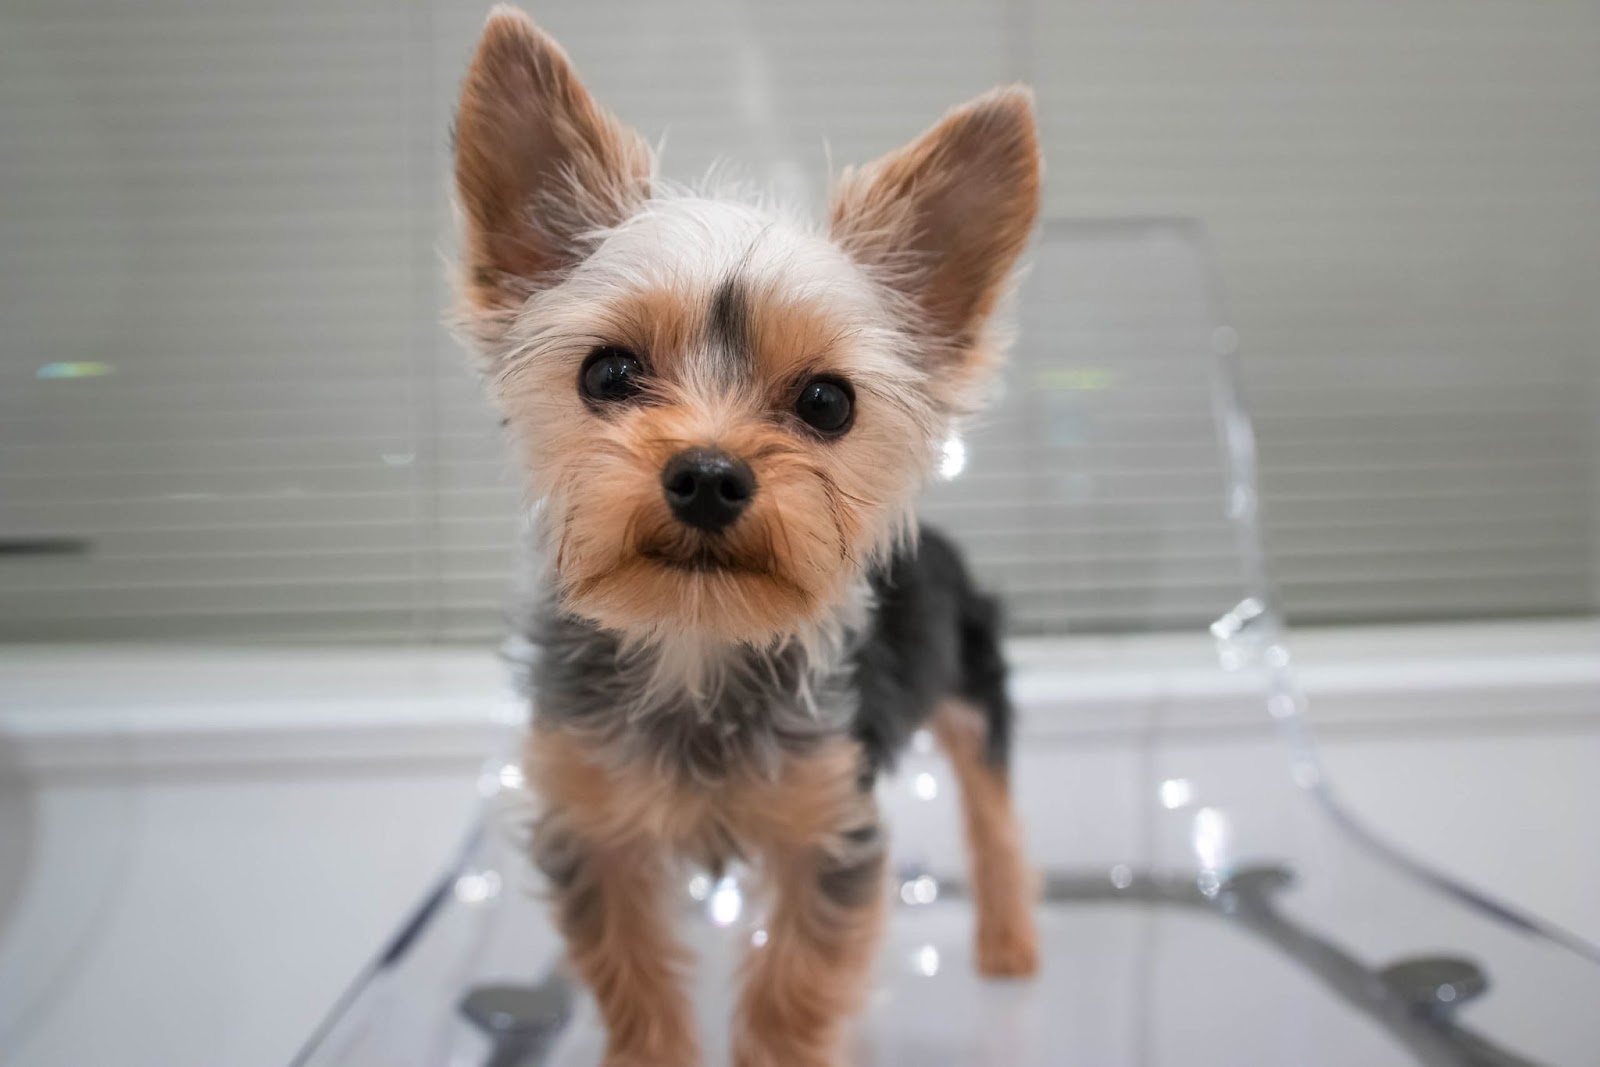 What Is the Best Haircut for a Yorkie?